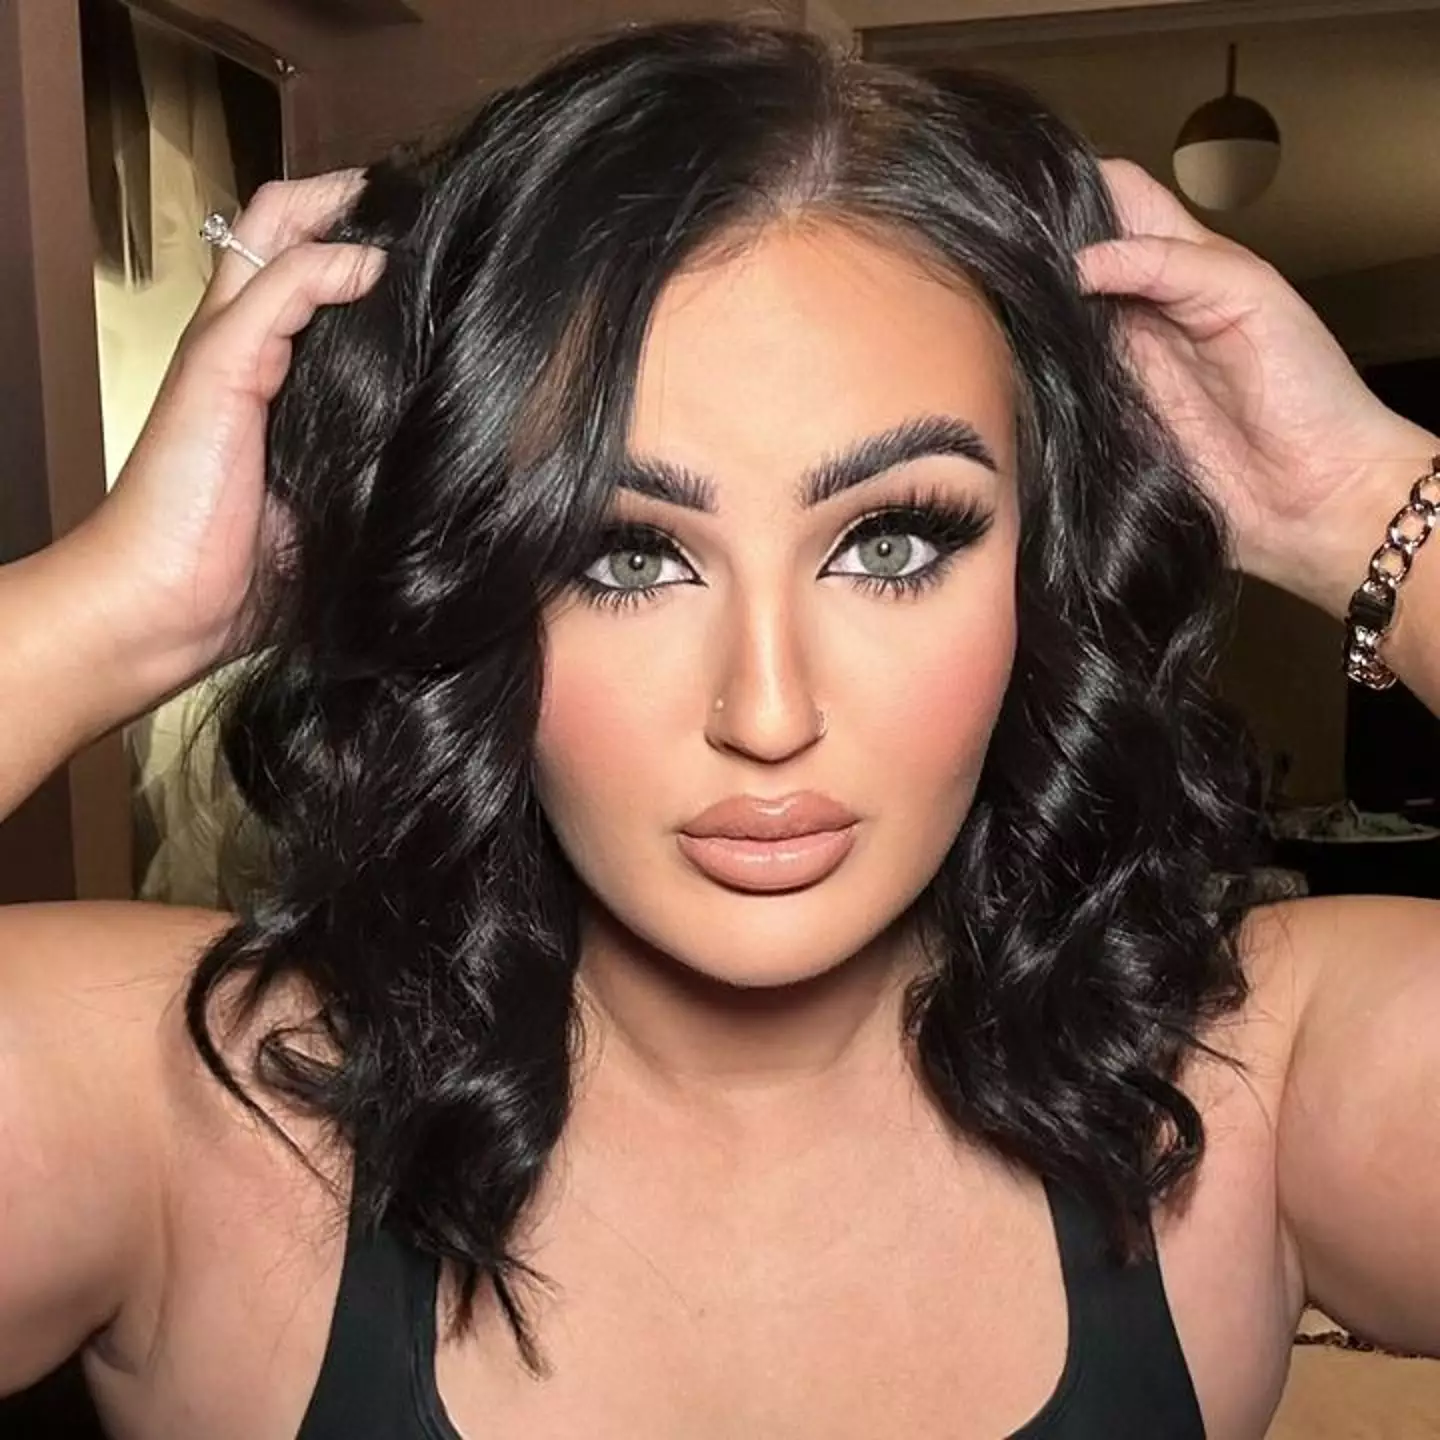 The influencer has over 14 million followers for her beauty content.